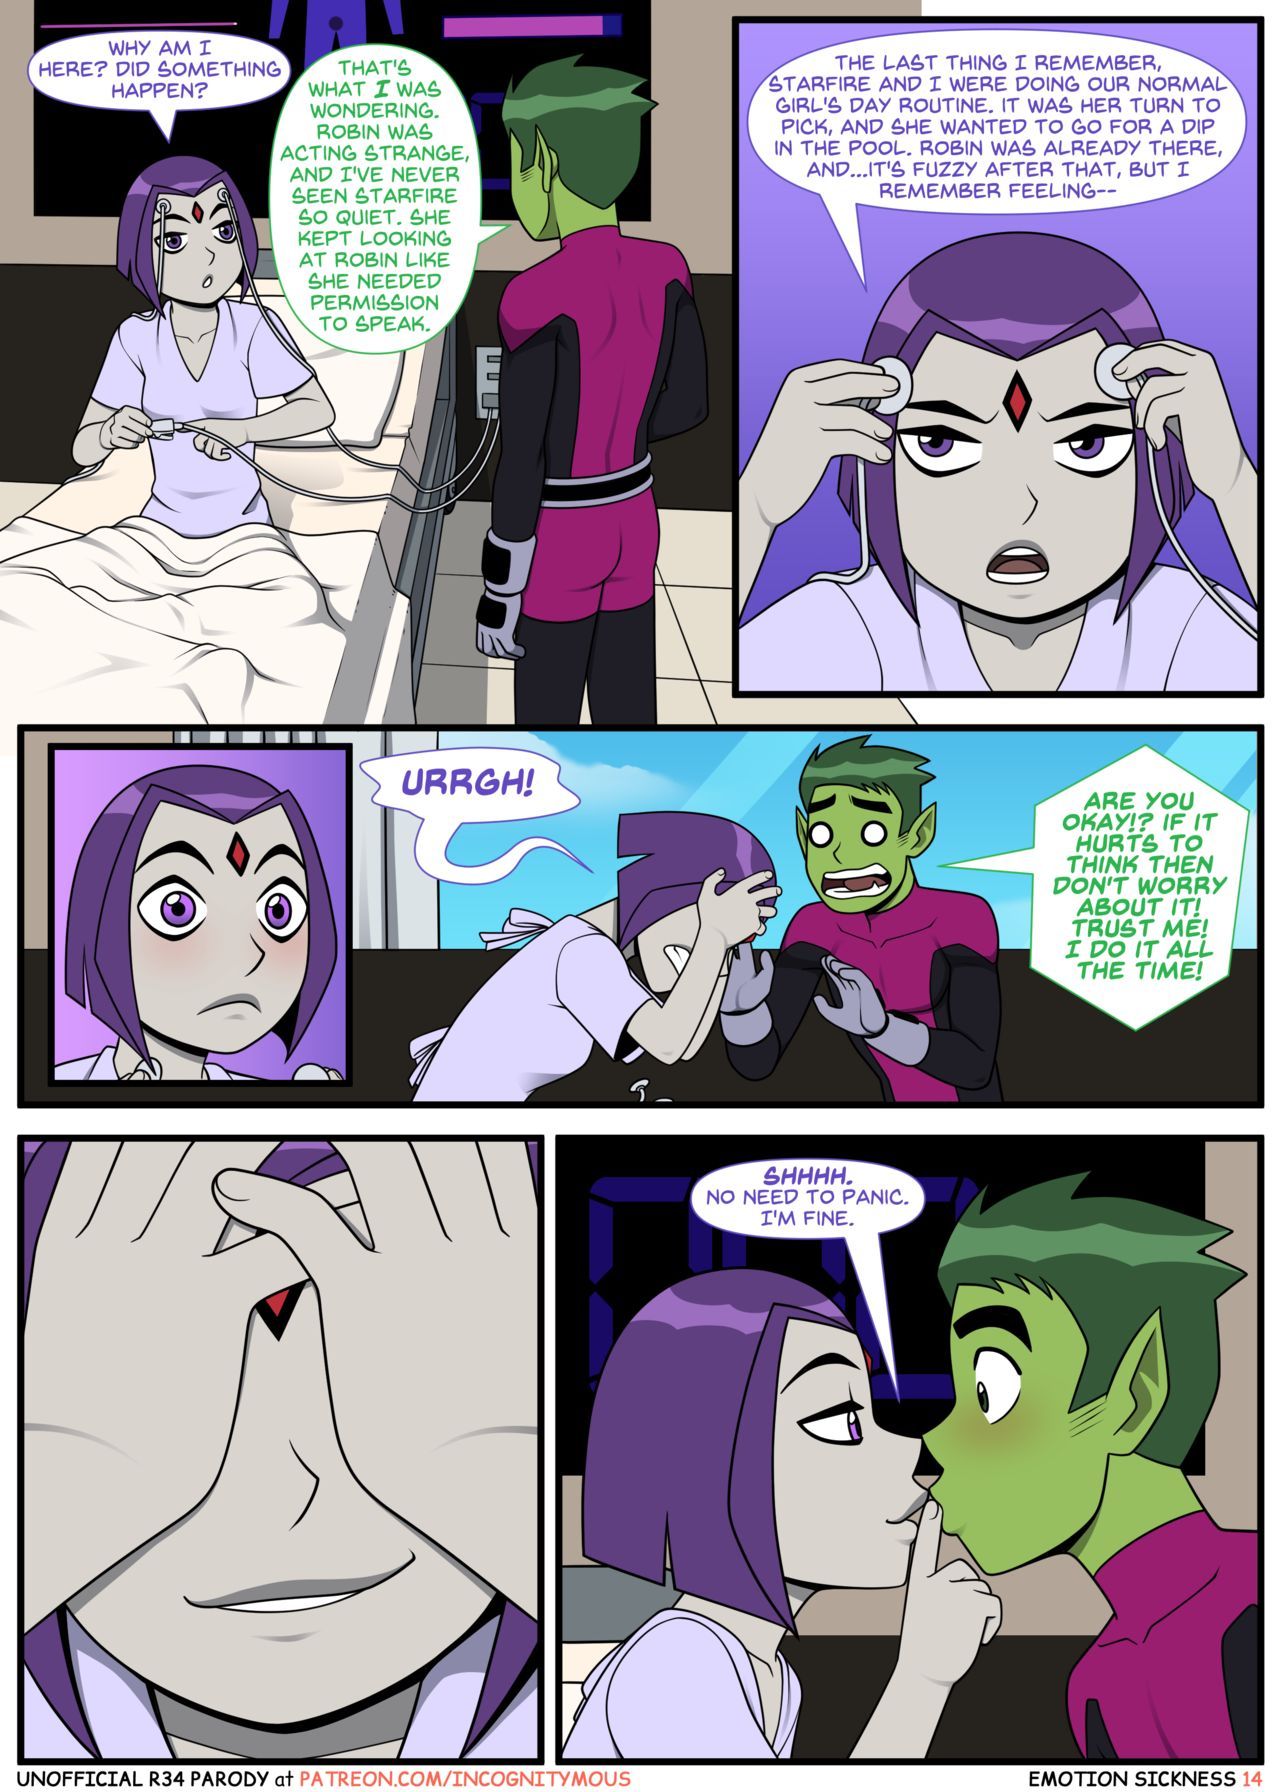 [Incognitymous] Emotion Sickness (Teen Titans) [Ongoing] 14